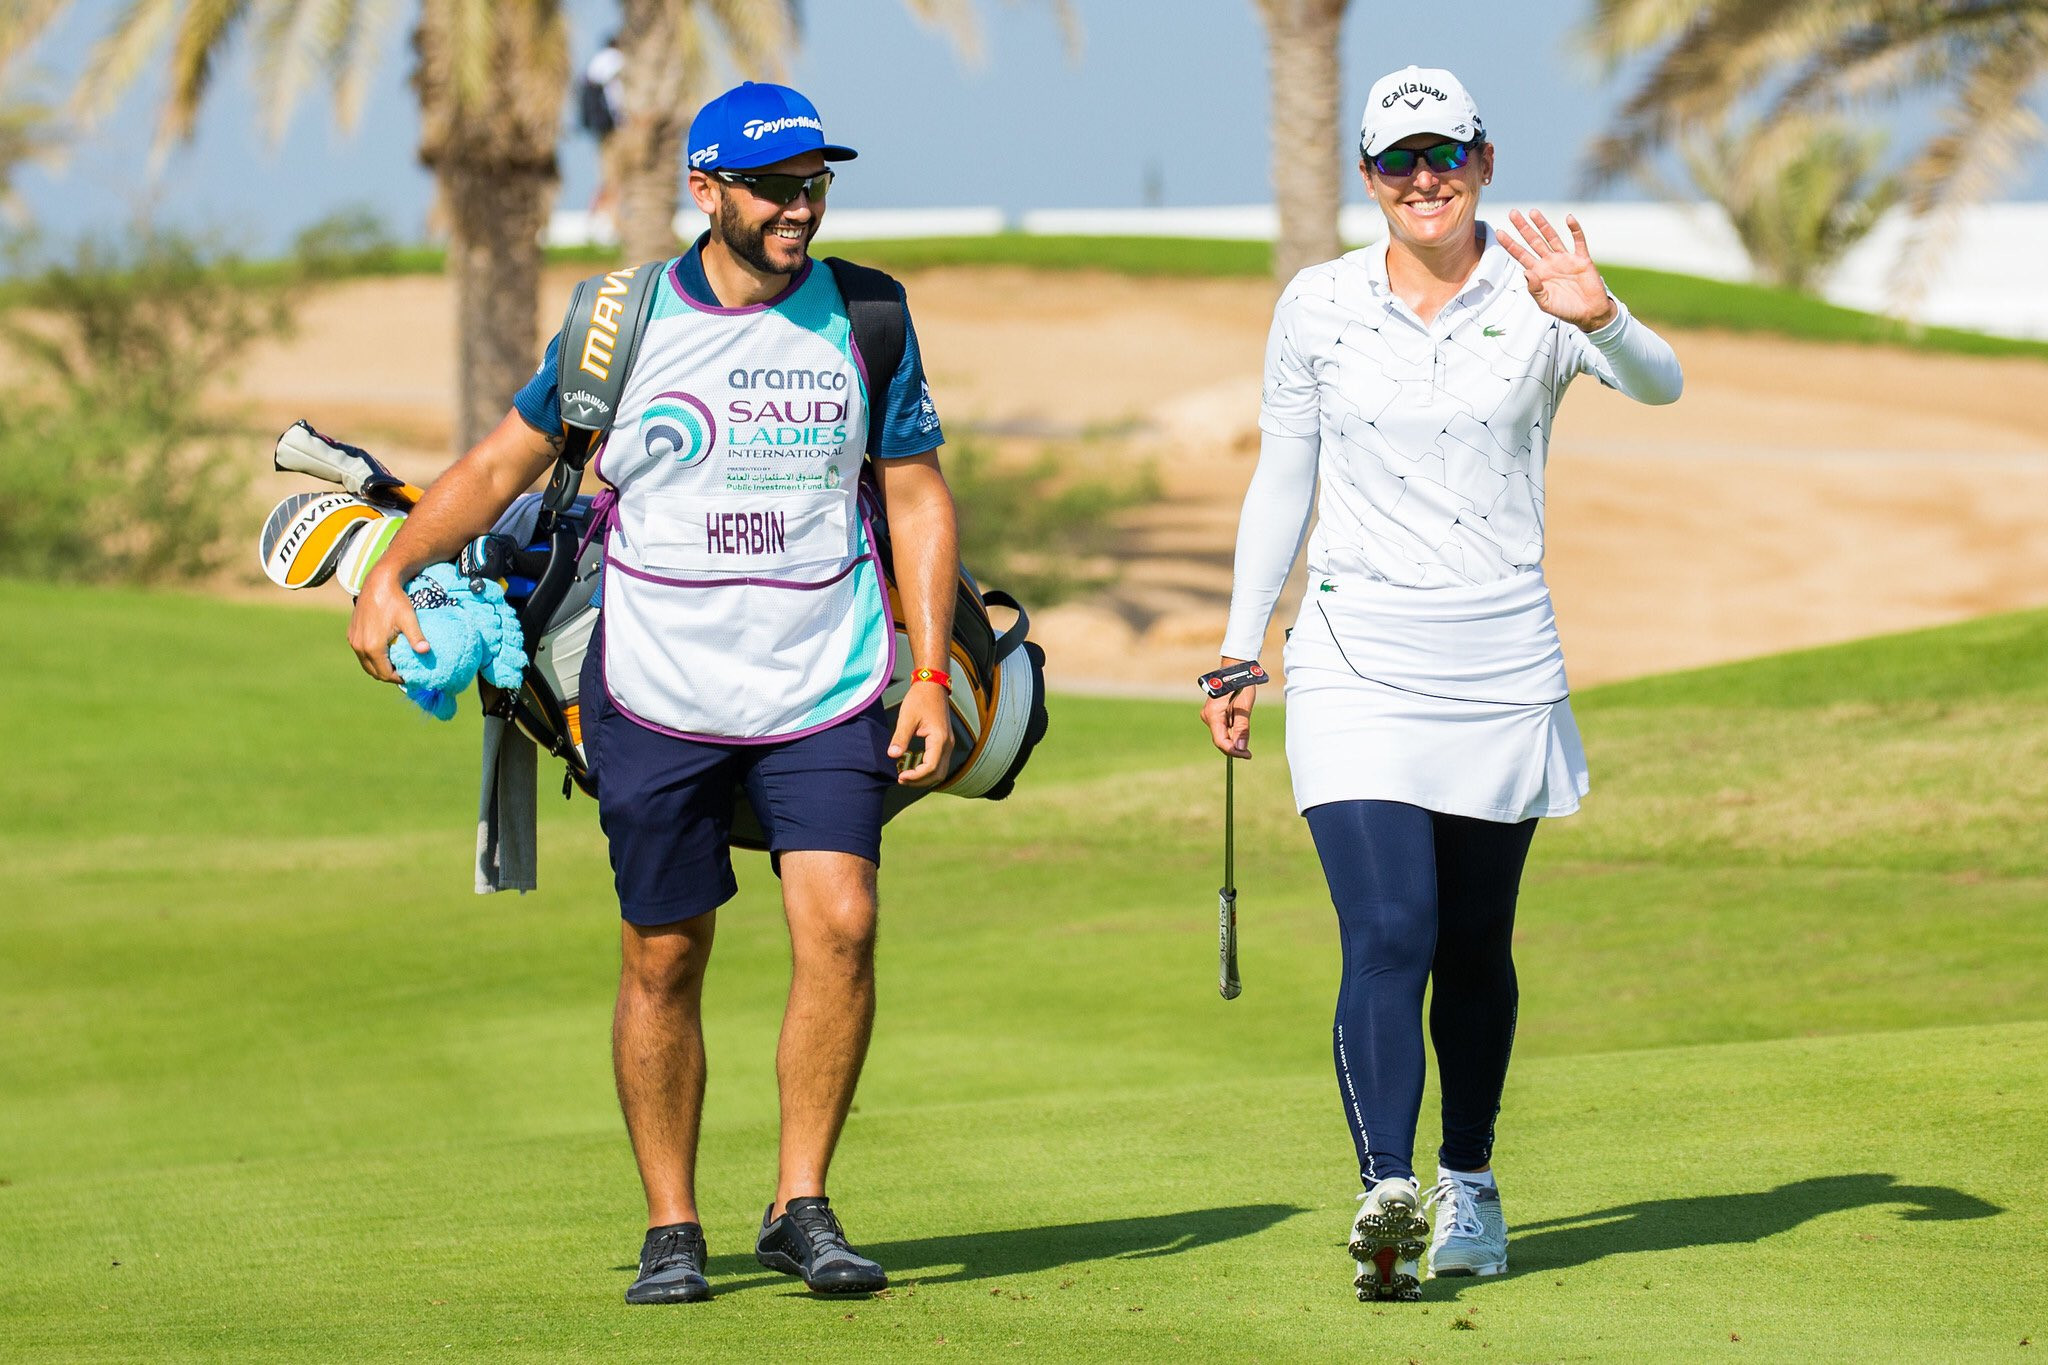 The Saudi Ladies International is currently taking place at the Royal Greens Golf Club near Jeddah ©Ladies European Tour